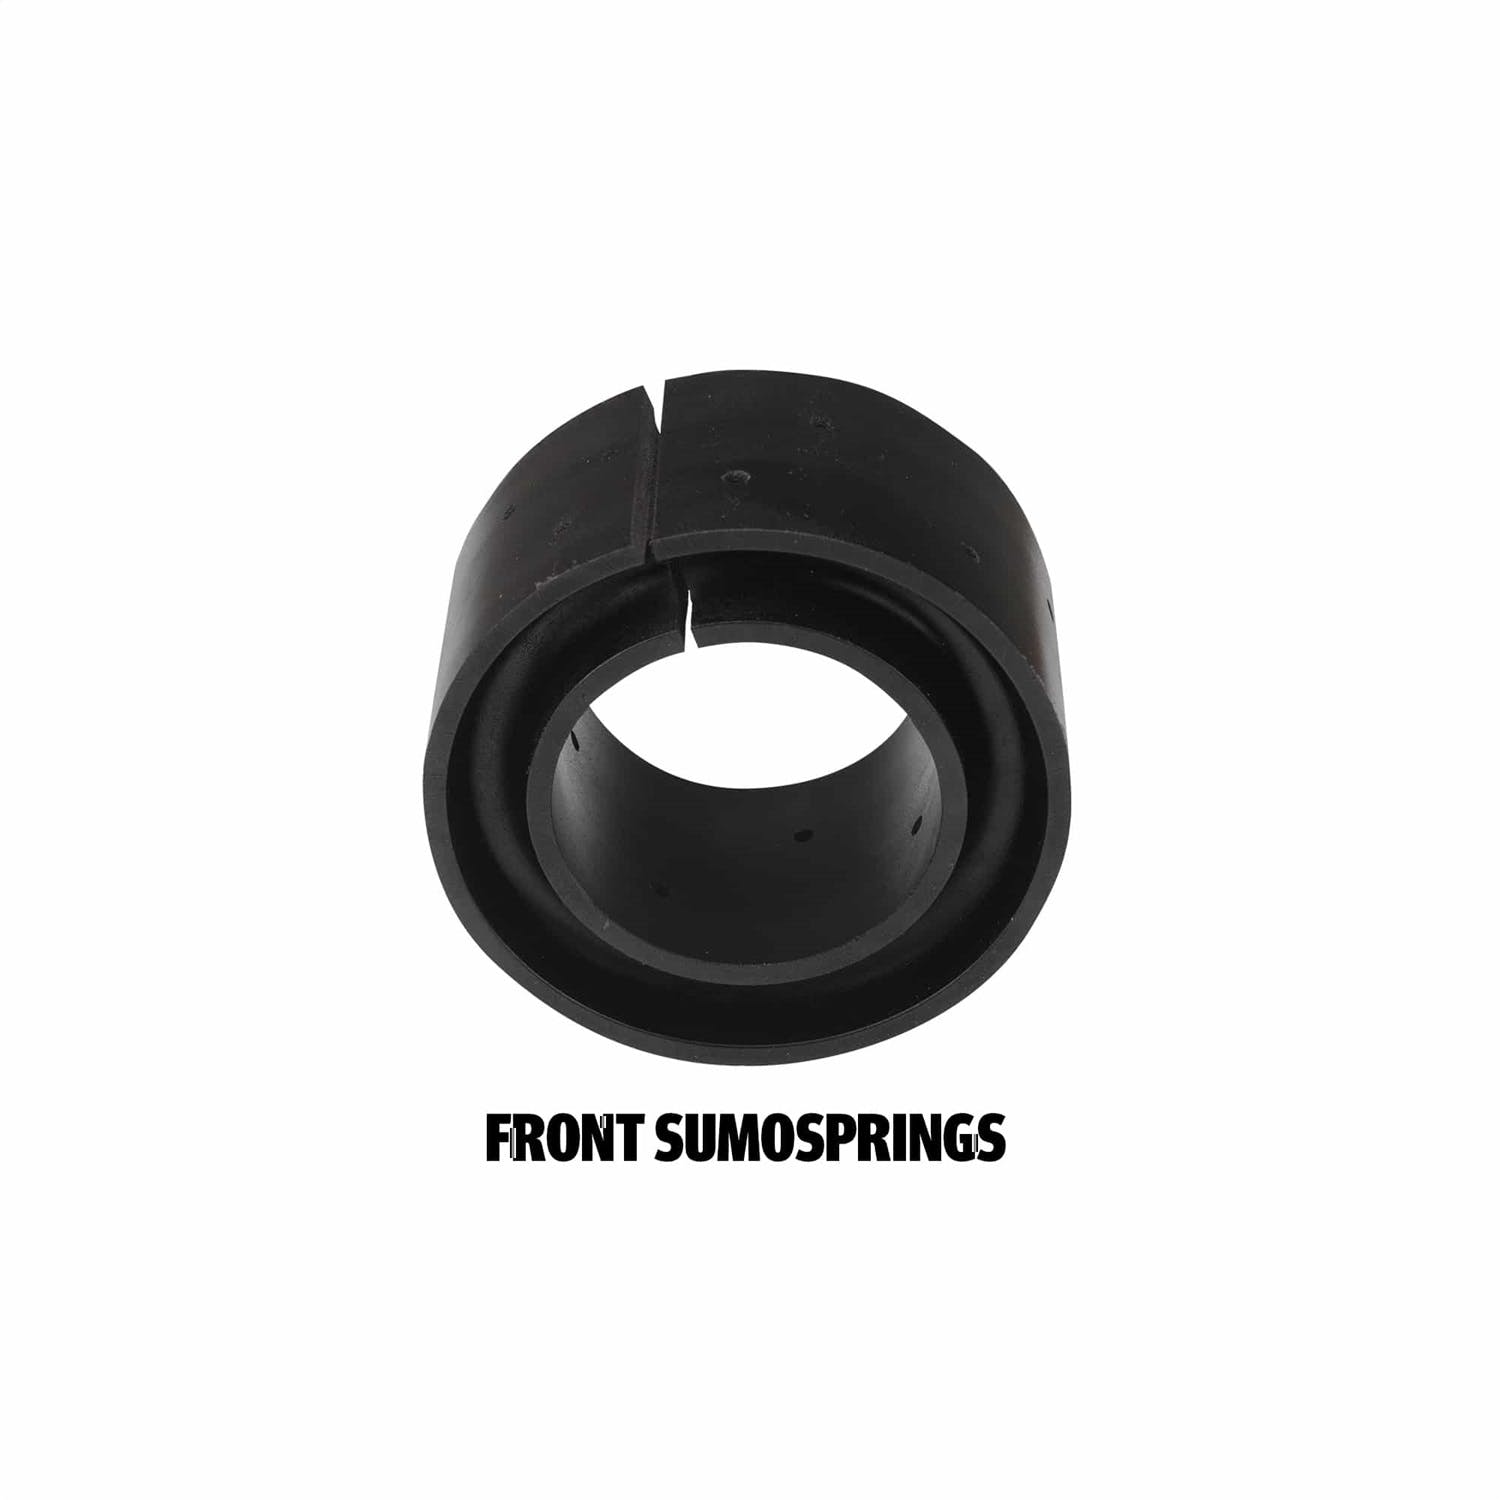 SuperSprings K-30-009 SumoSprings Front and Rear Kits are one-piece units attached on each side